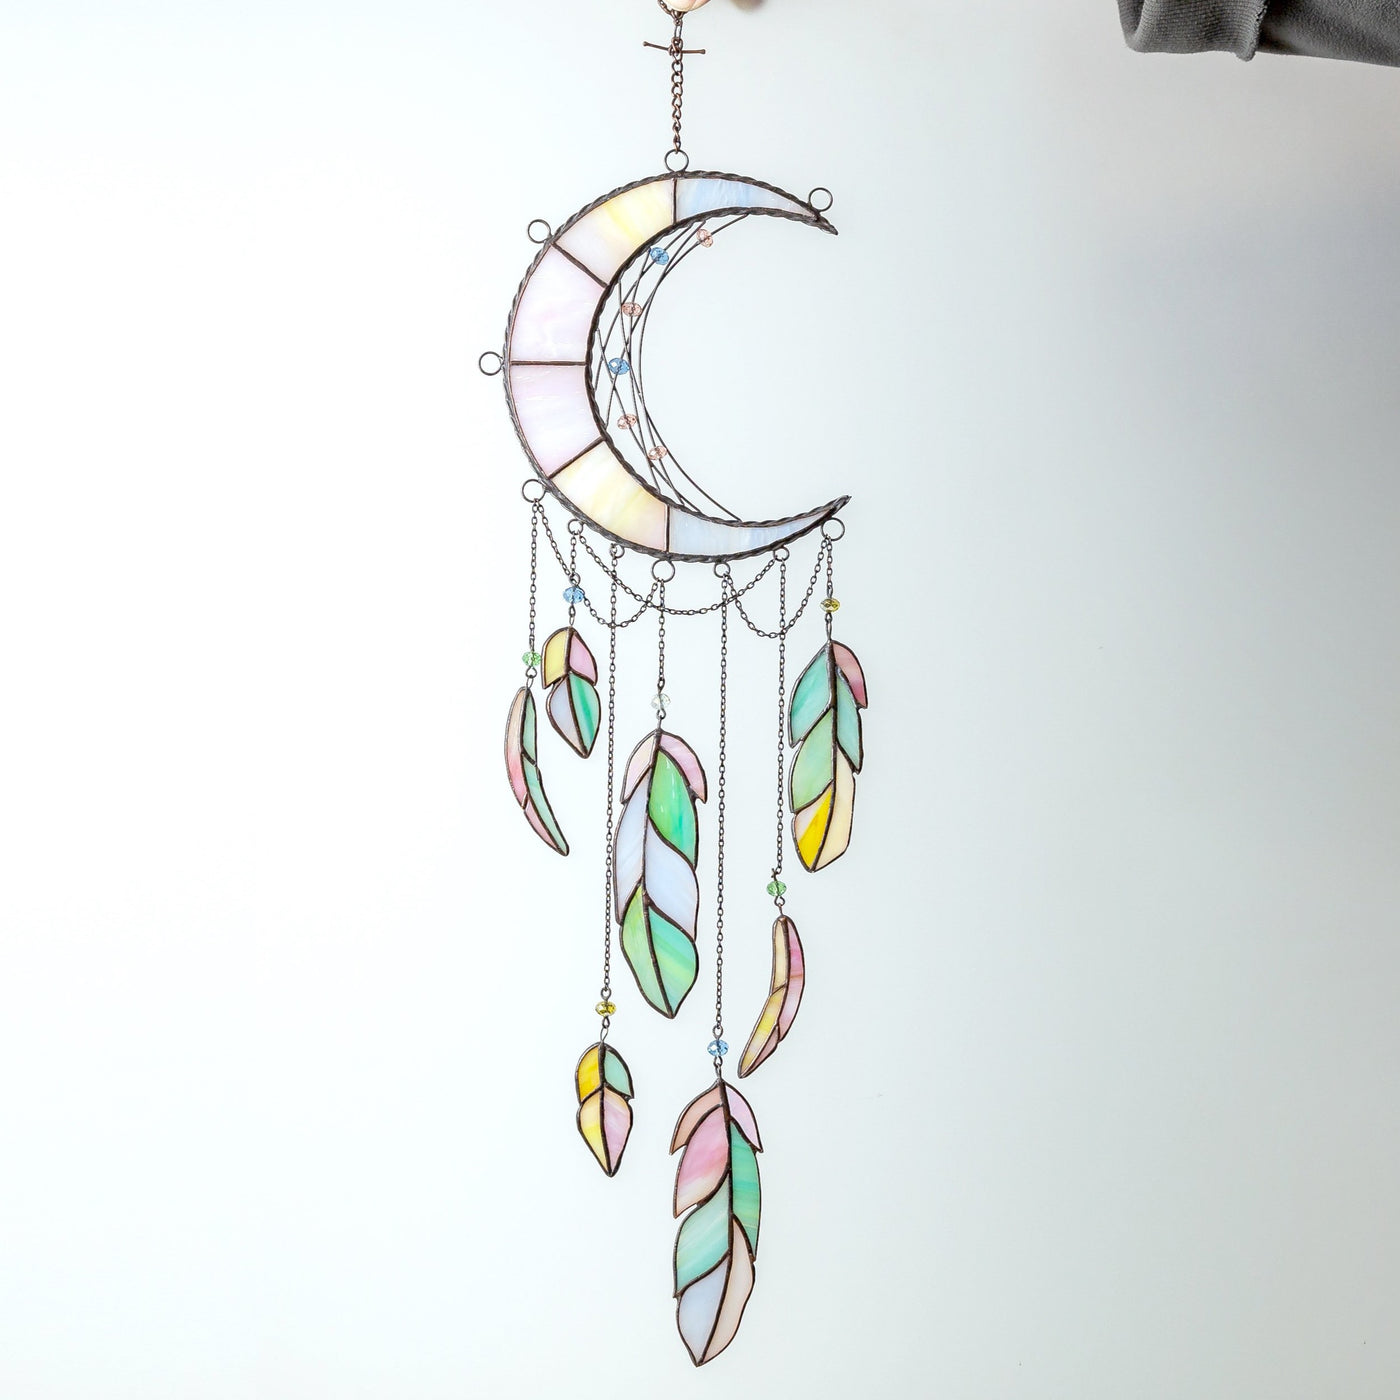 Stained glass moon dreamcatcher with colourful feathers in the lower part 